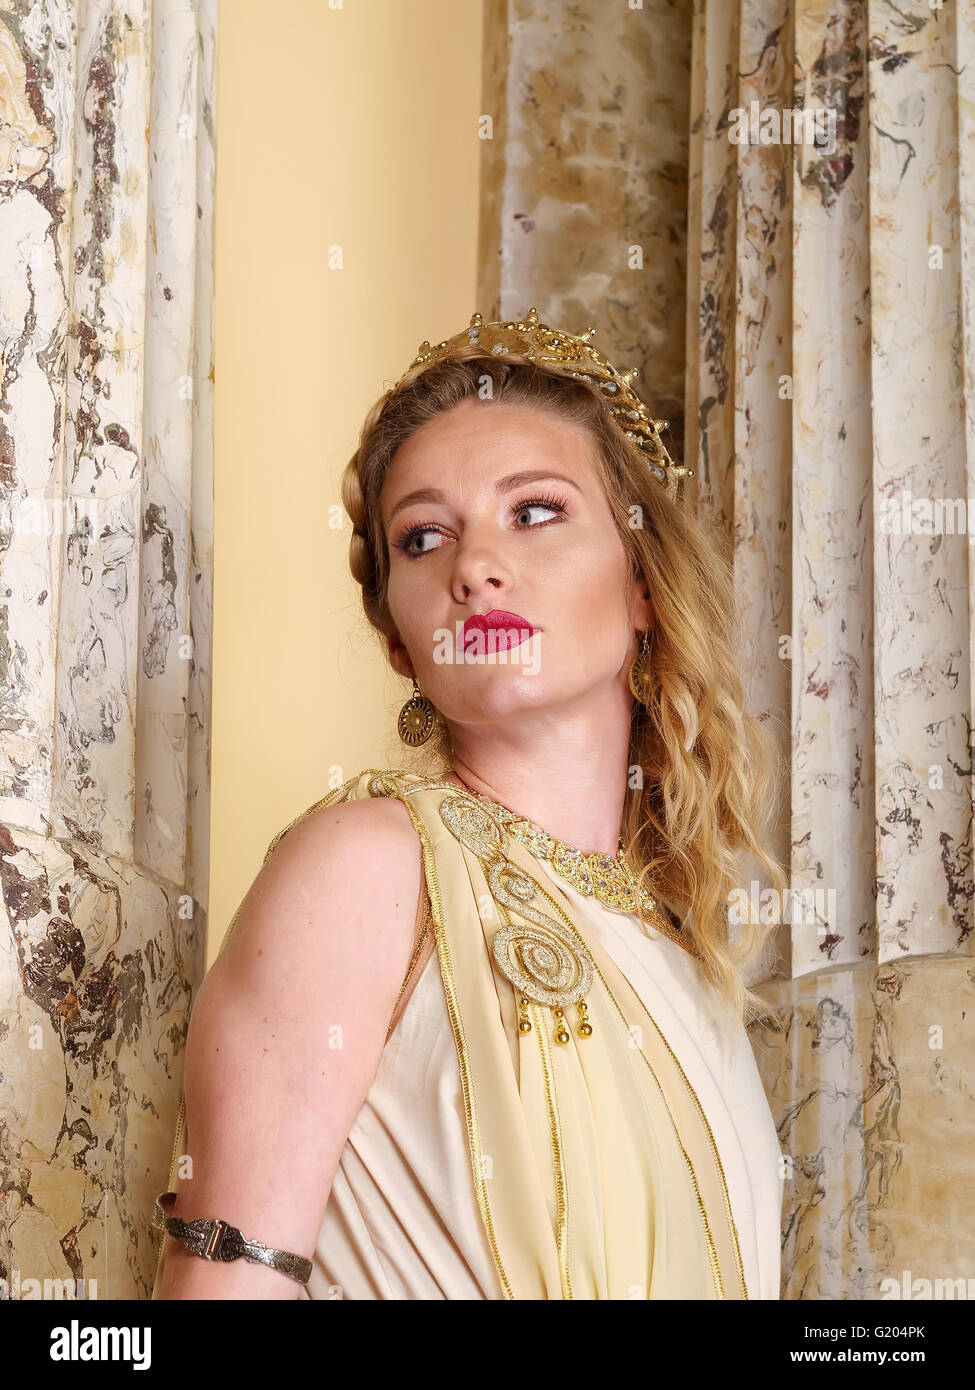 woman in traditional roman clothing posing in temple Stock Photo - Alamy